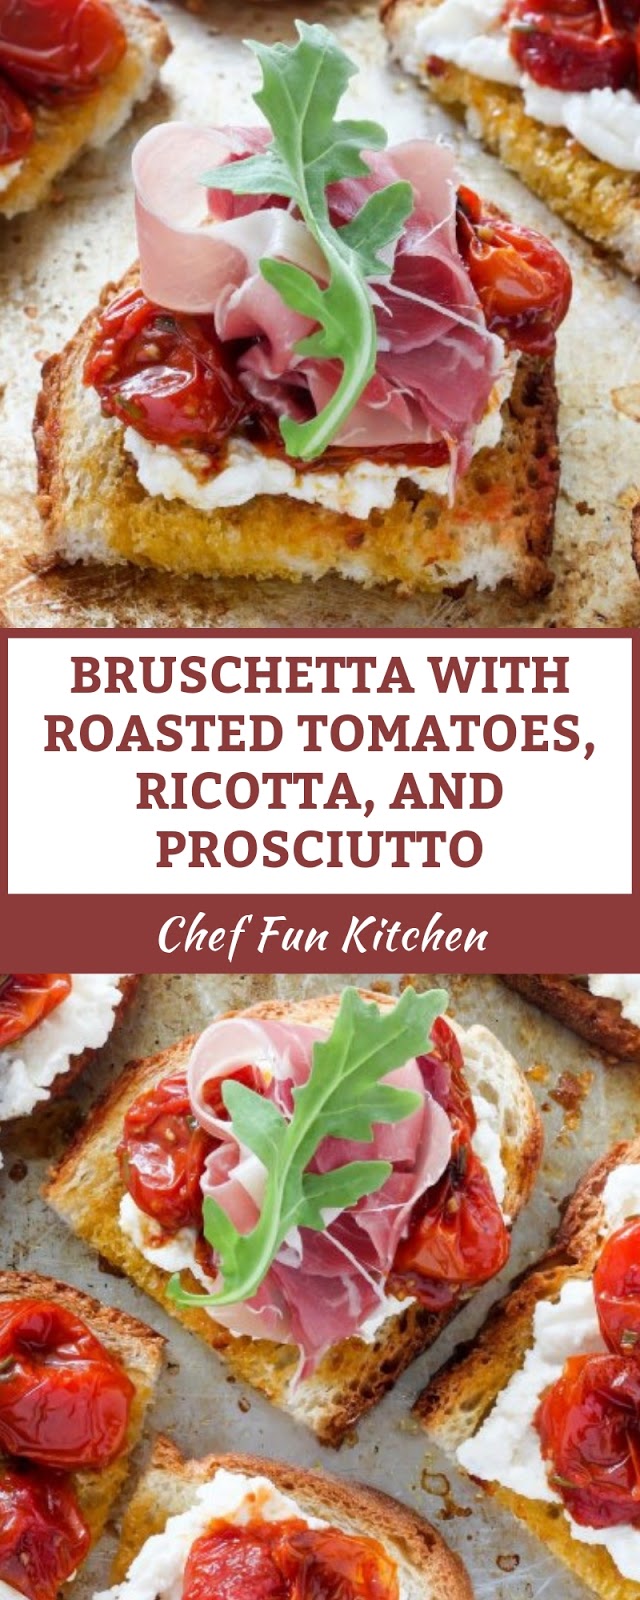 BRUSCHETTA WITH ROSEMARY, ROASTED TOMATOES, RICOTTA, AND PROSCIUTTO